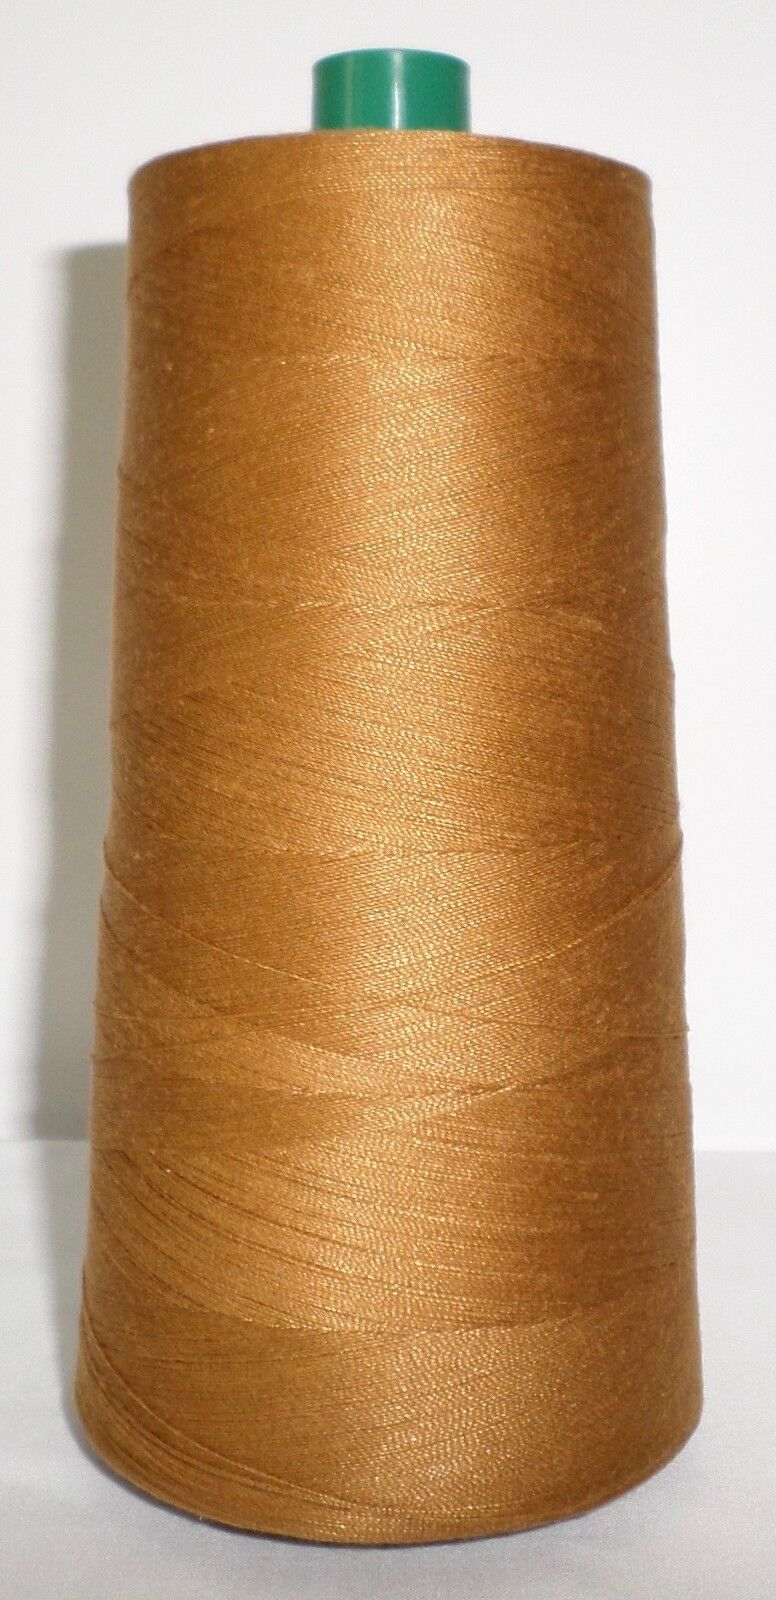 Nomex Sewing Thread - Helia Beer Co